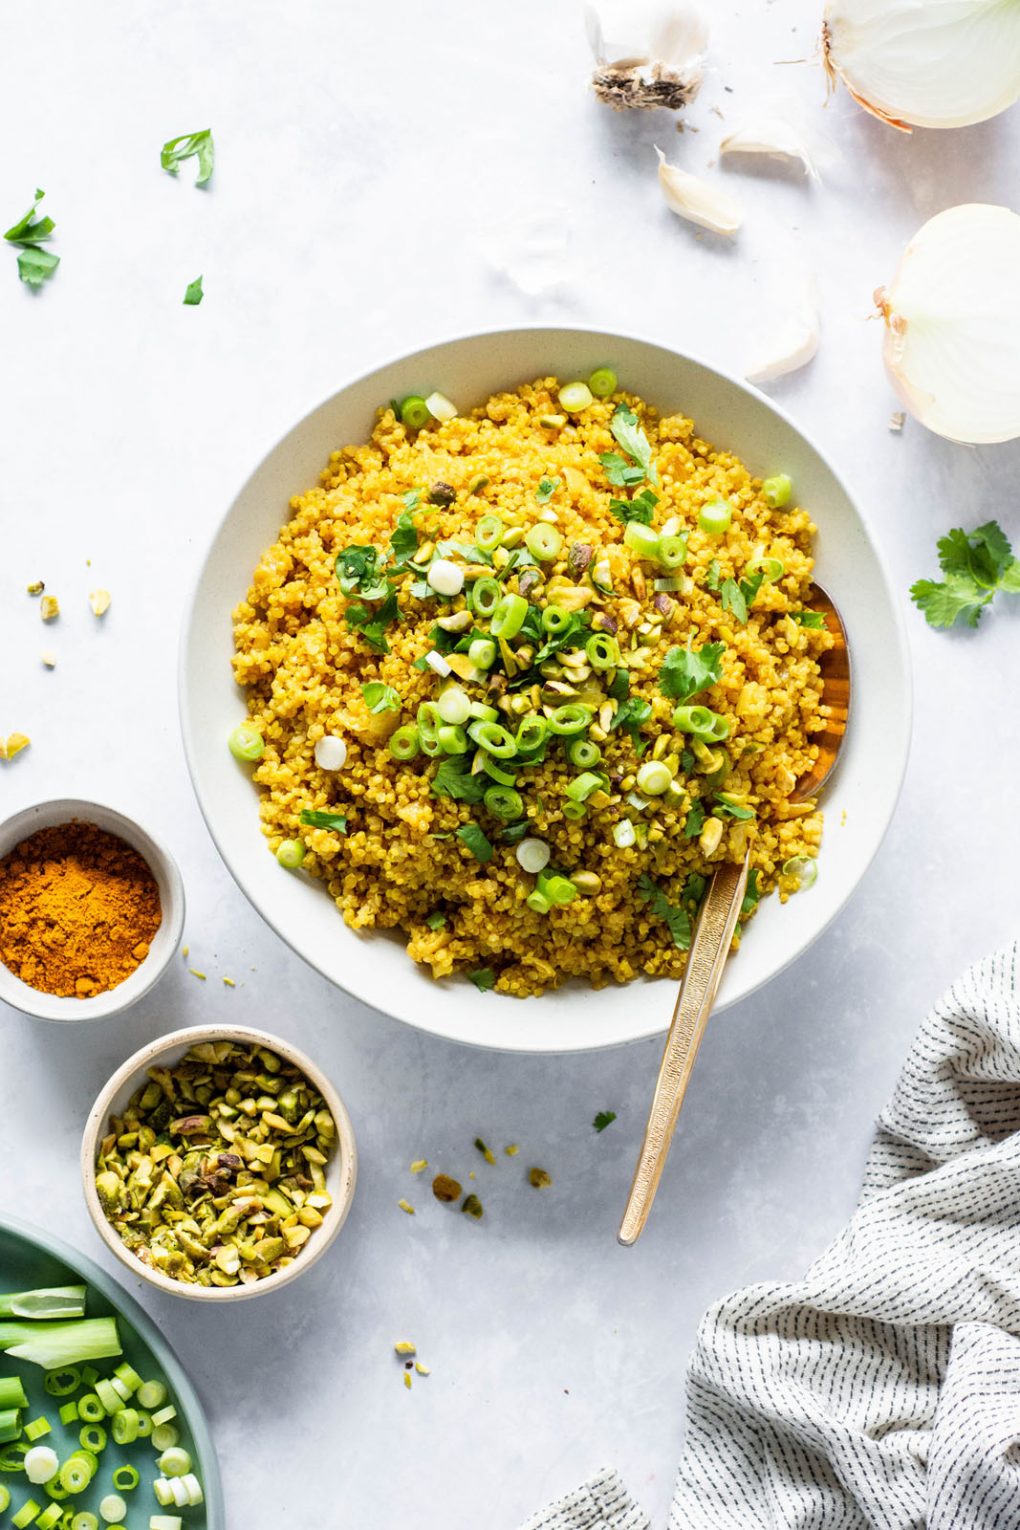 Big white bowl of bright yellow curried quinoa topped with cilantro, green onions, and pistachios. On a light colored background next to a small bowl of pistachios, a small bowl of curry powder, and an onion sliced in half. There's a large gold metal spoon in the bowl. 